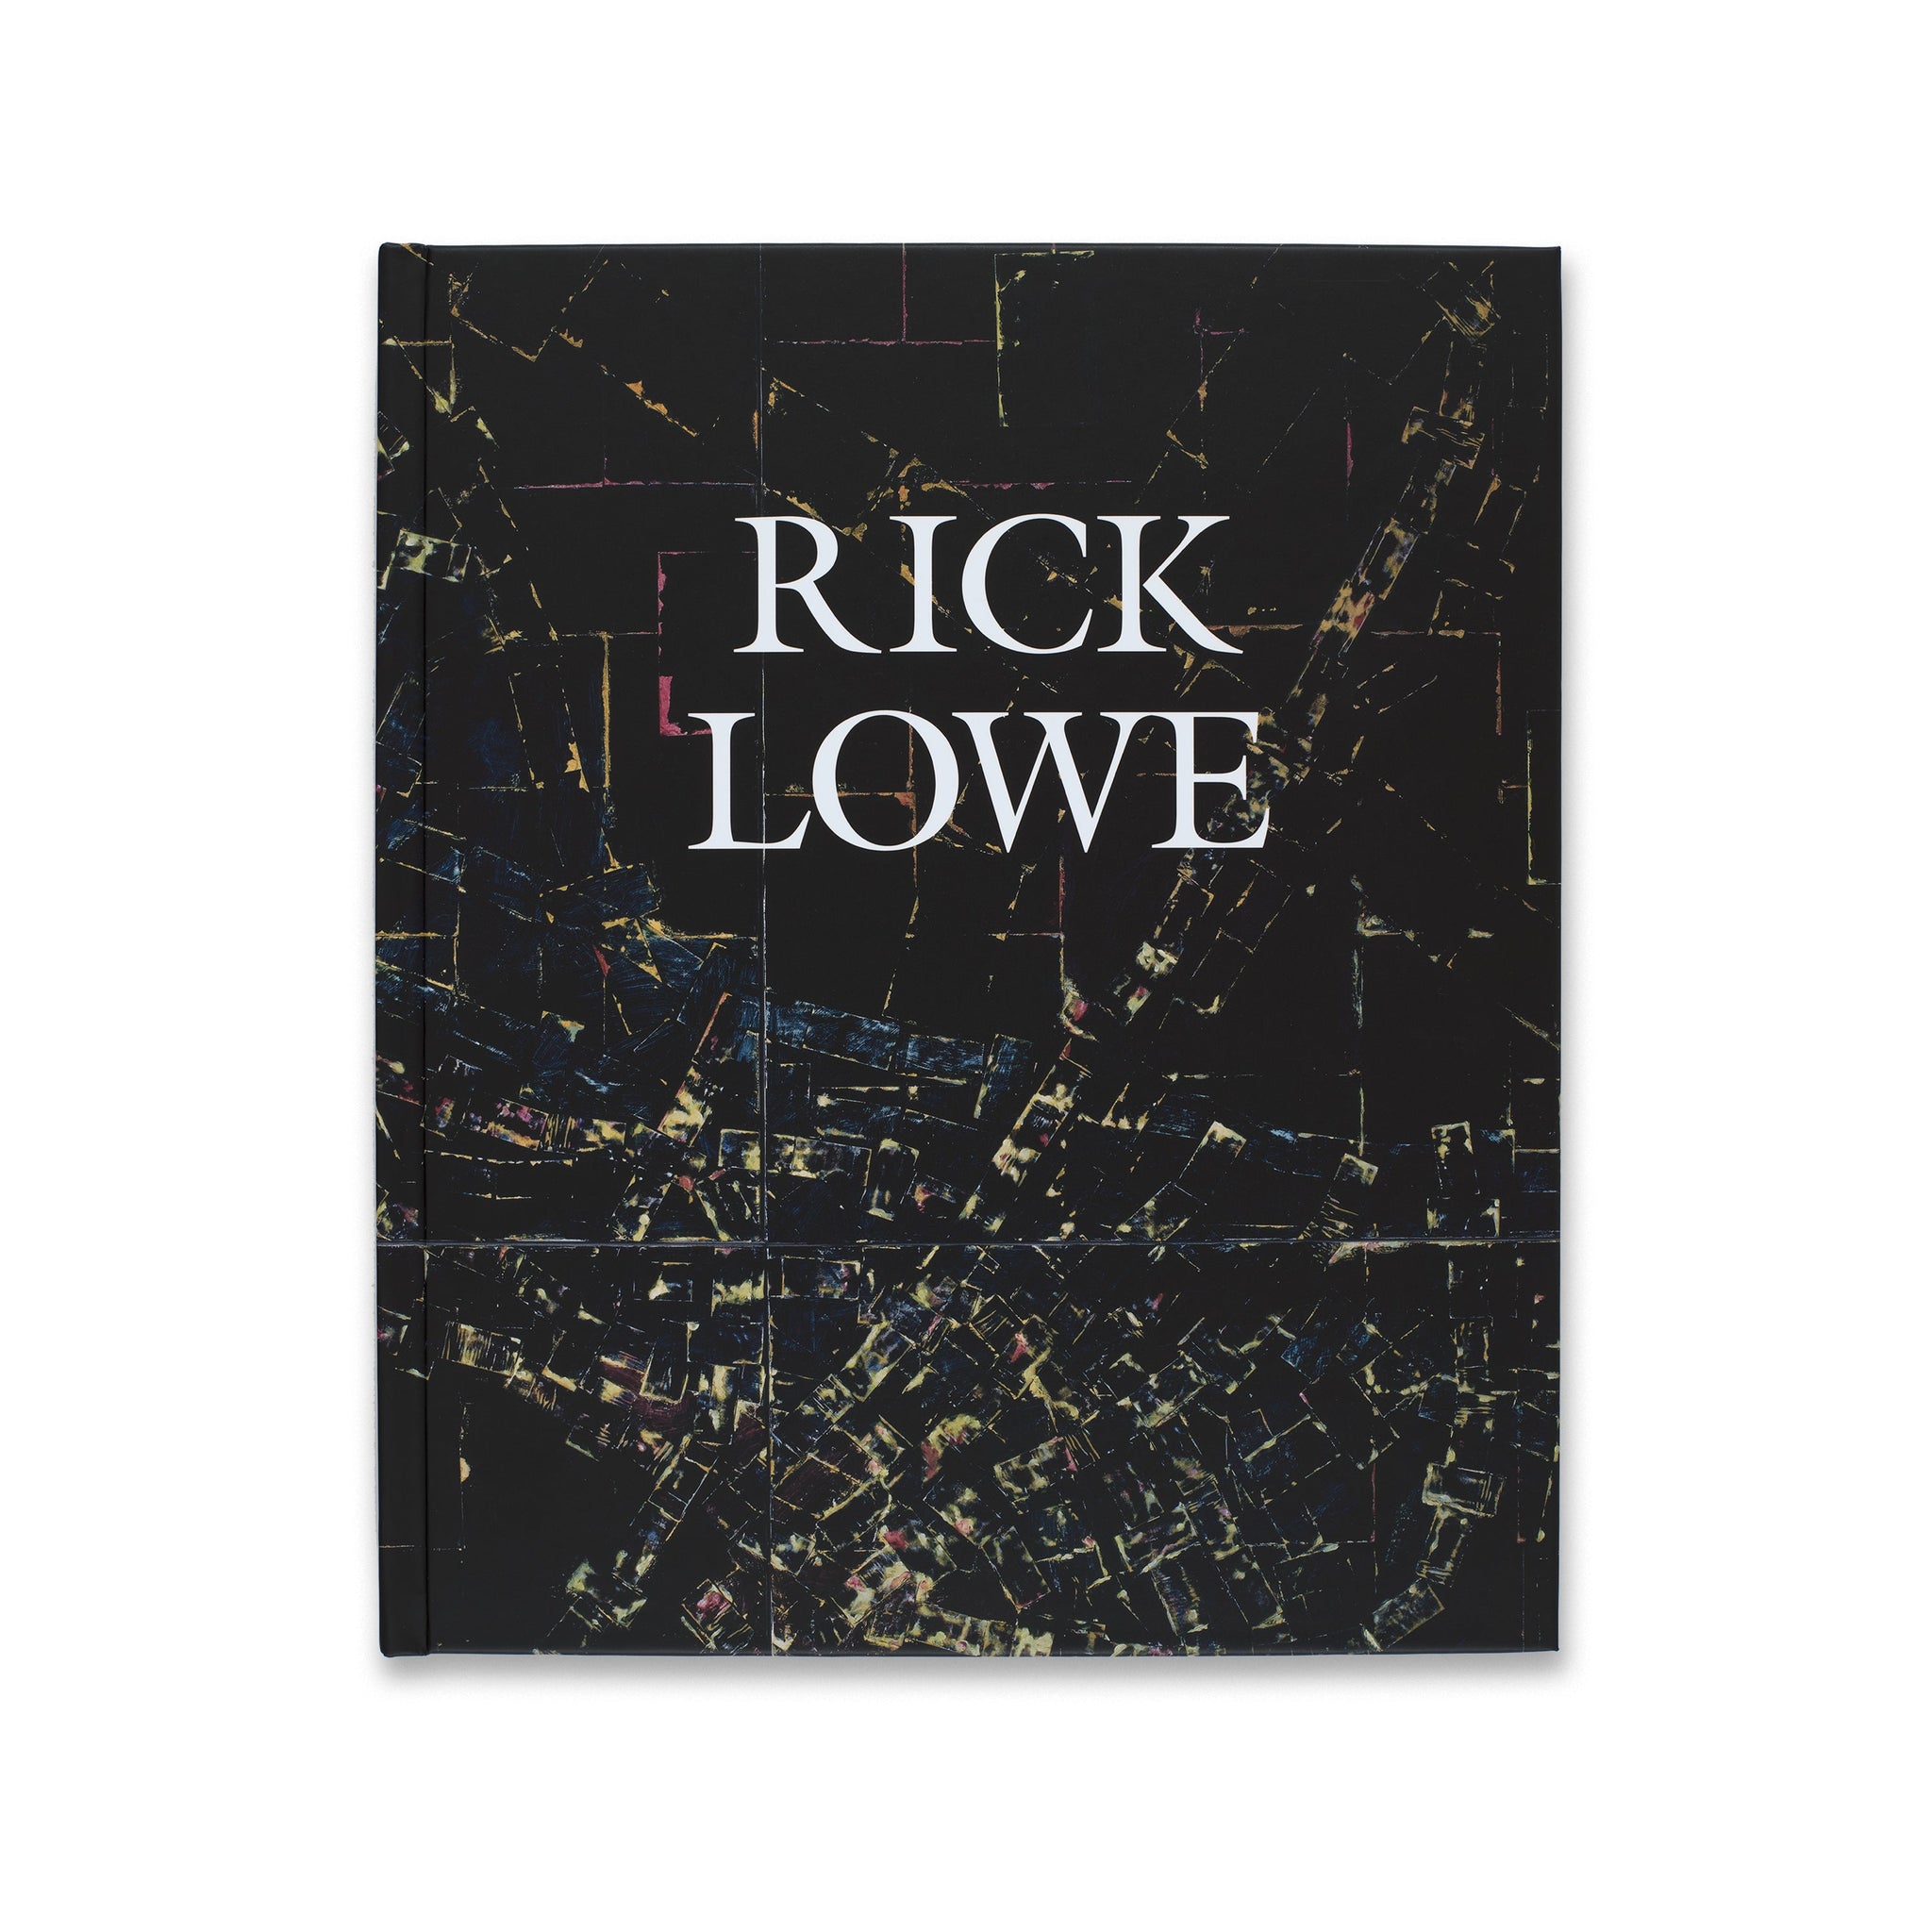 Cover of the Rick Lowe monograph